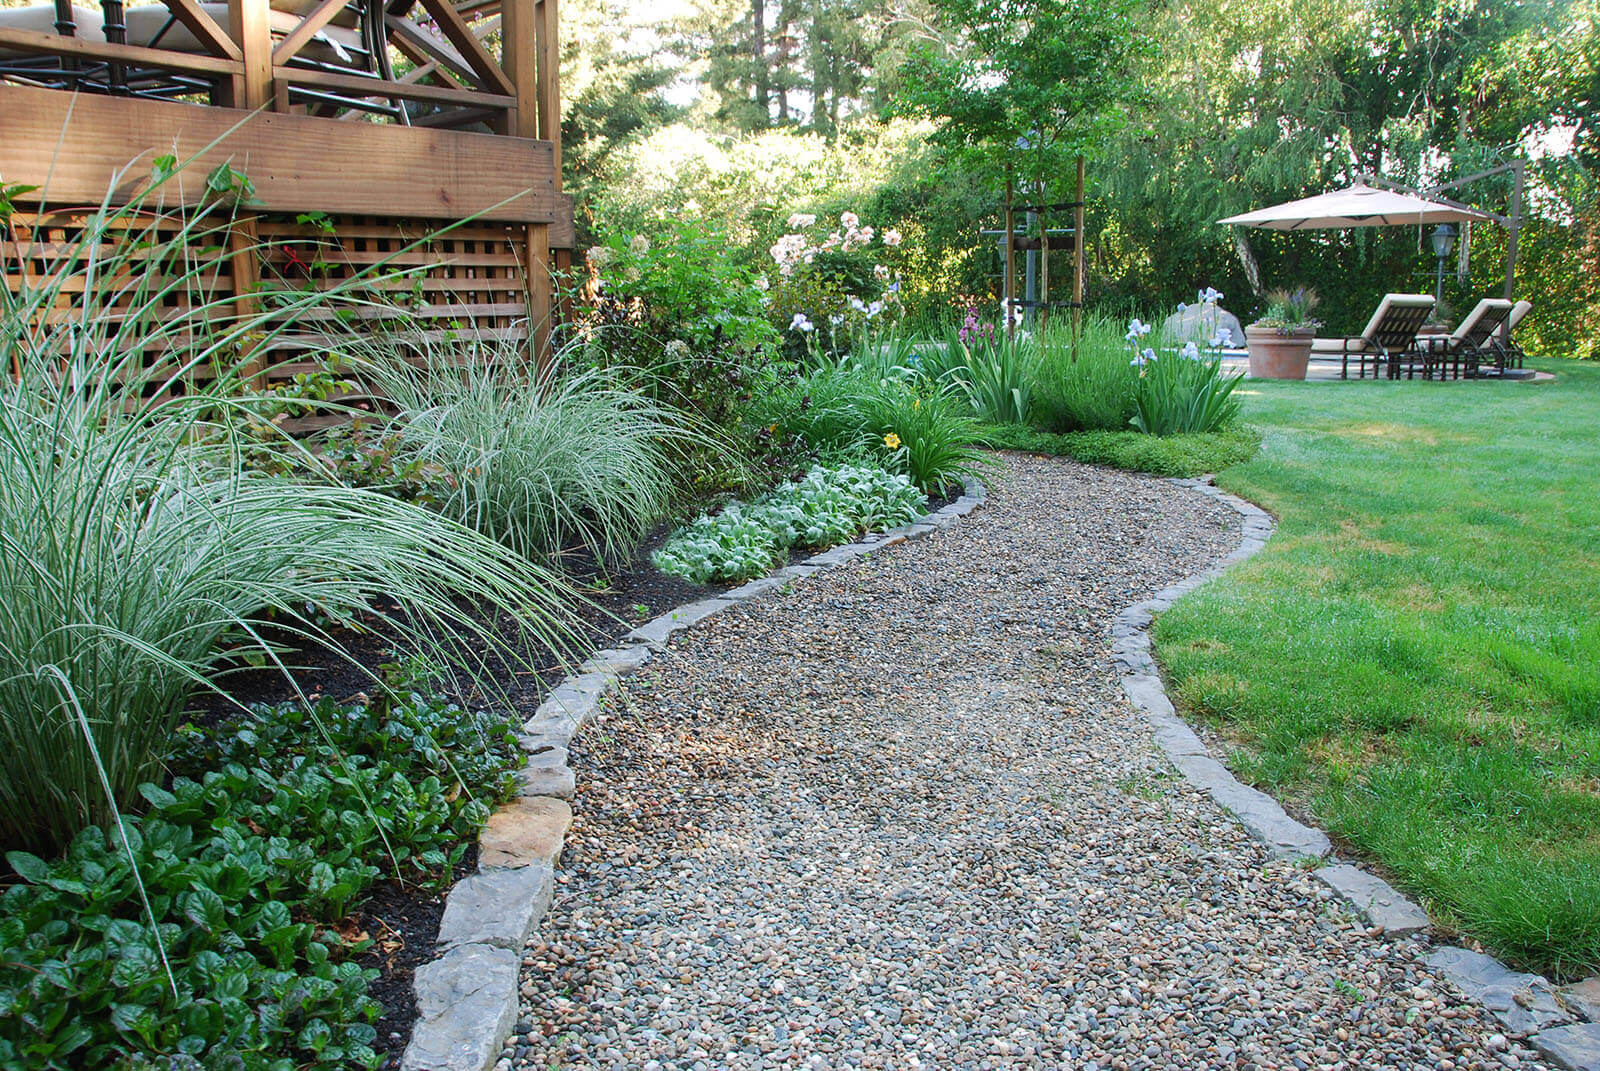 rock-lined gravel pathway, running through the yard